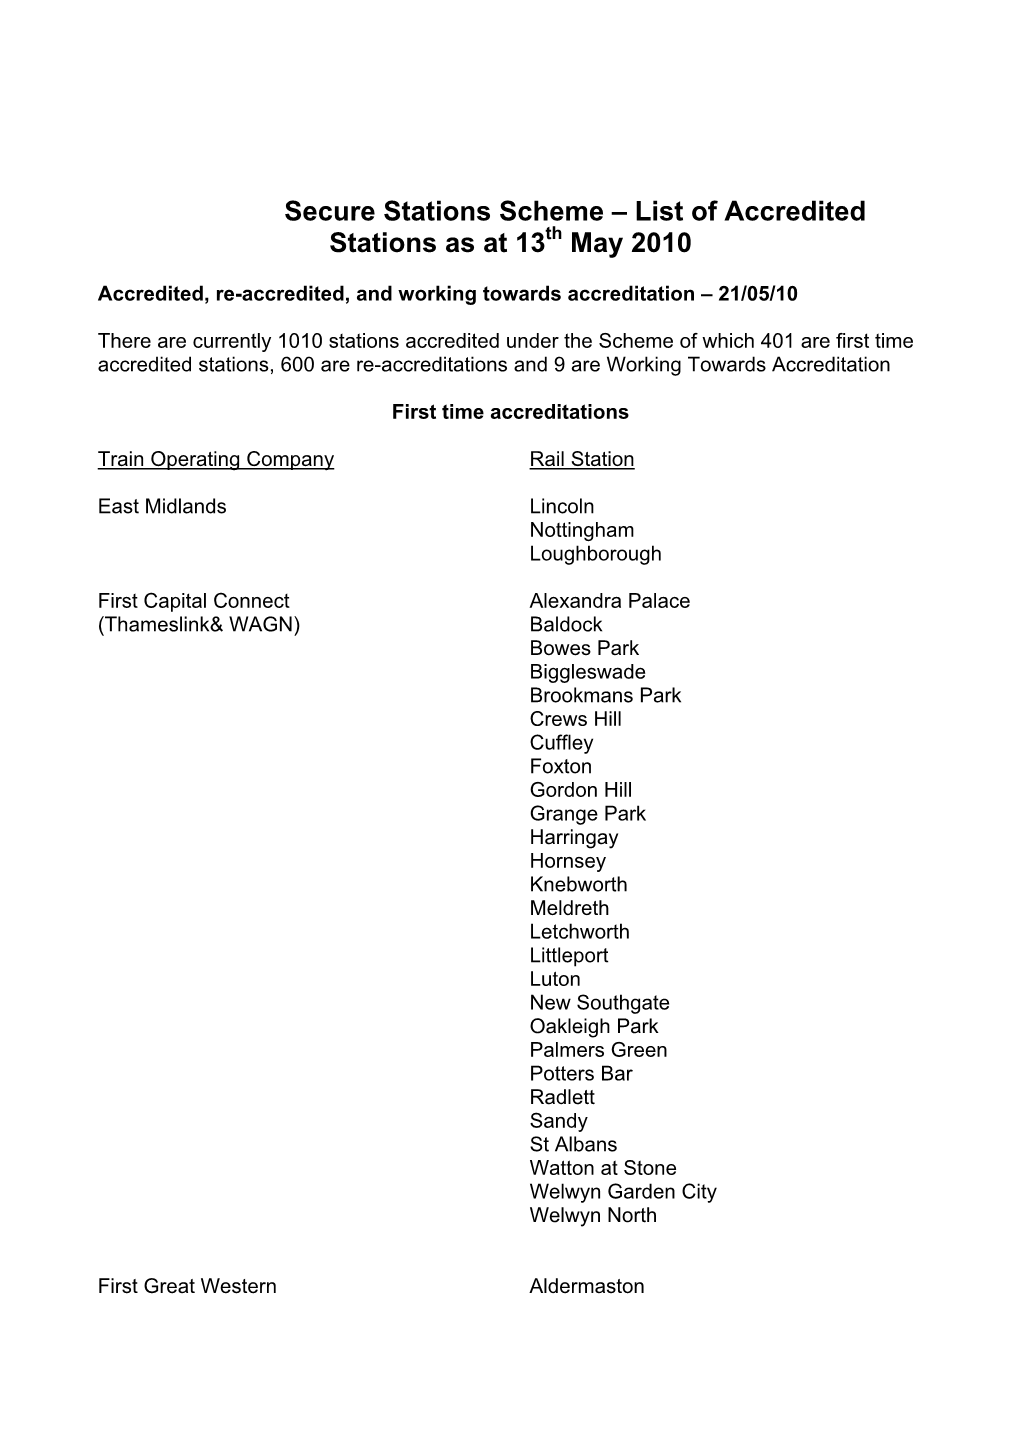 Secure Stations Scheme – List of Accredited Stations As at 13Th May 2010